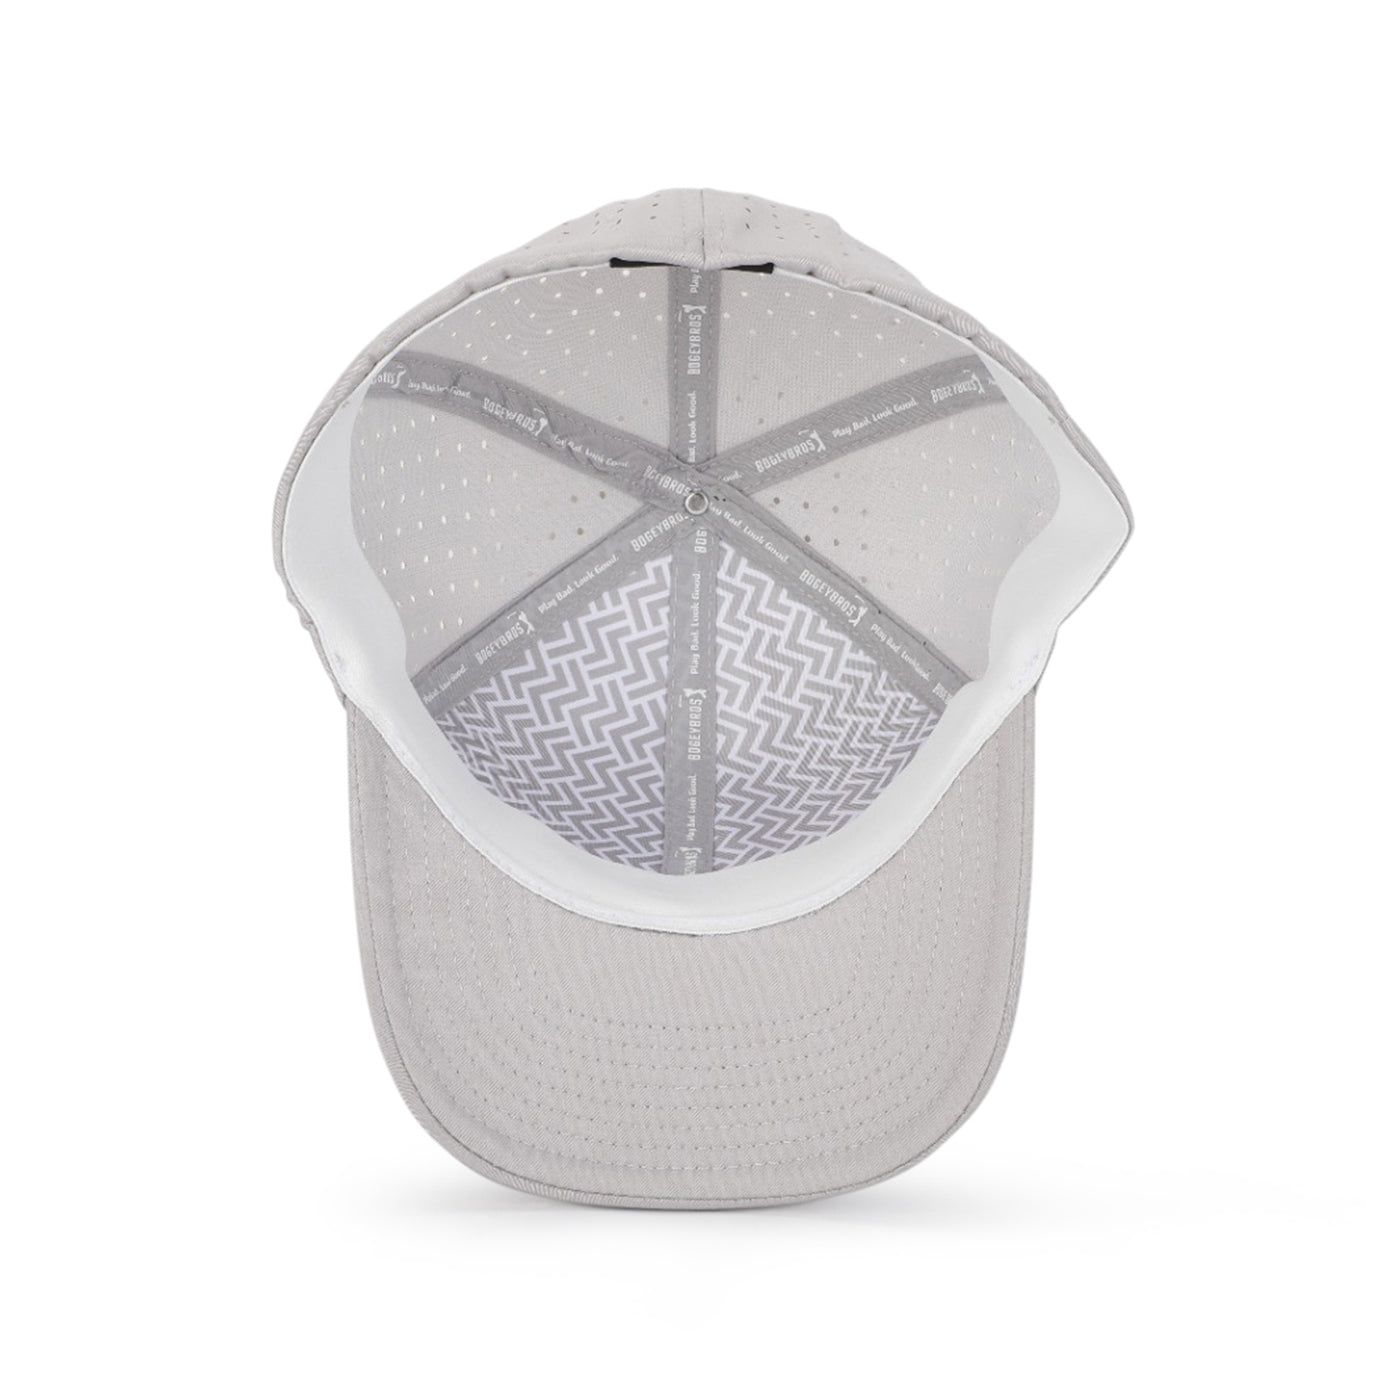 Balls Deep - Performance Golf Hat - Fitted